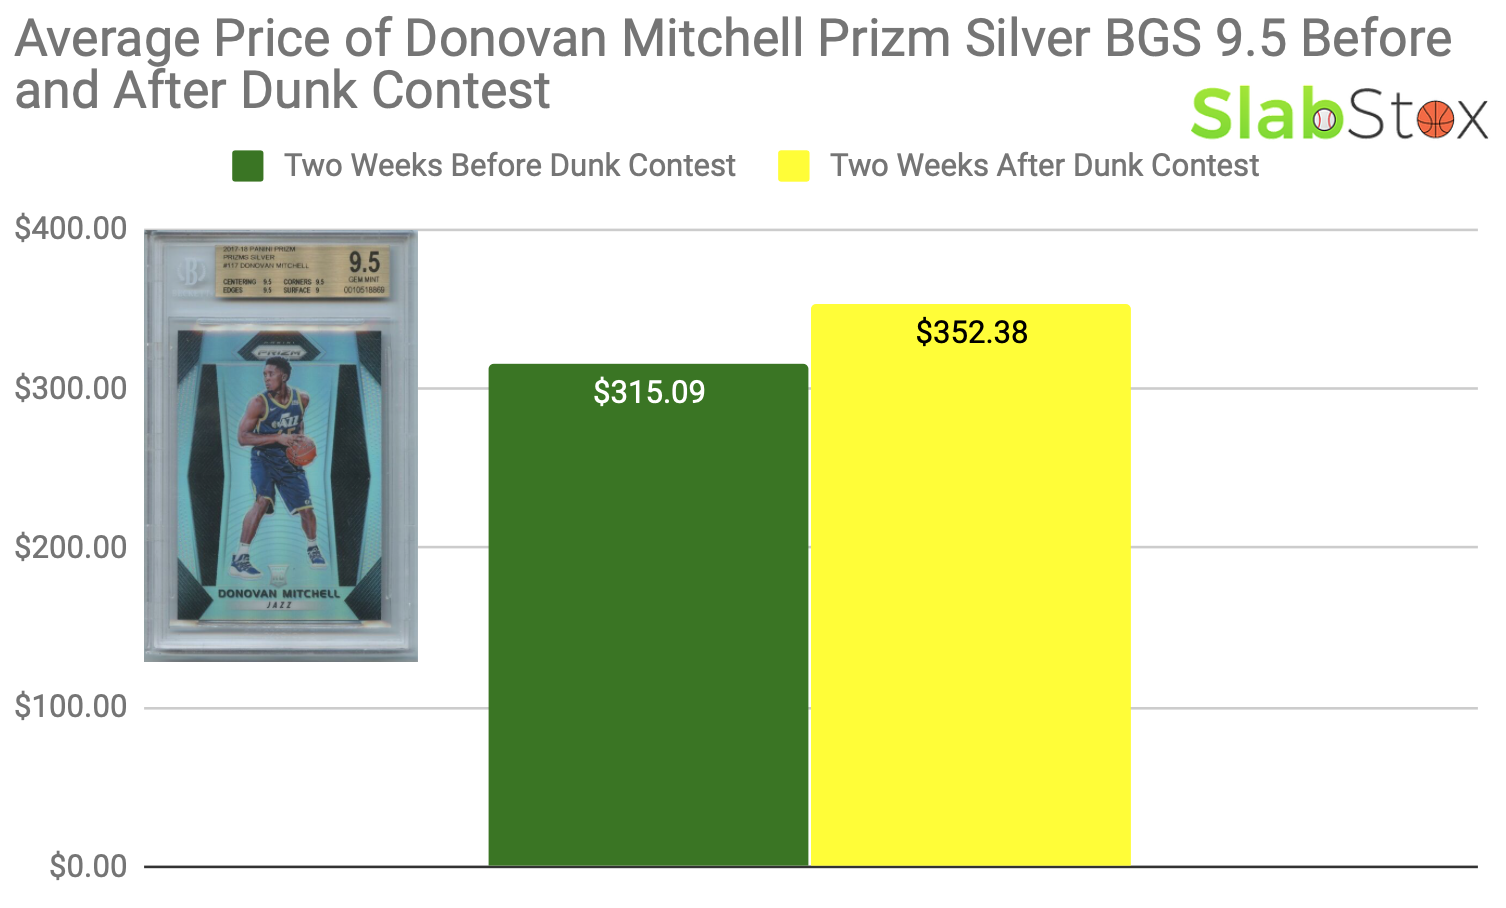 Average price of Donovan Mitchell Prizm Silver BGS 9.5 before and after Dunk Contest